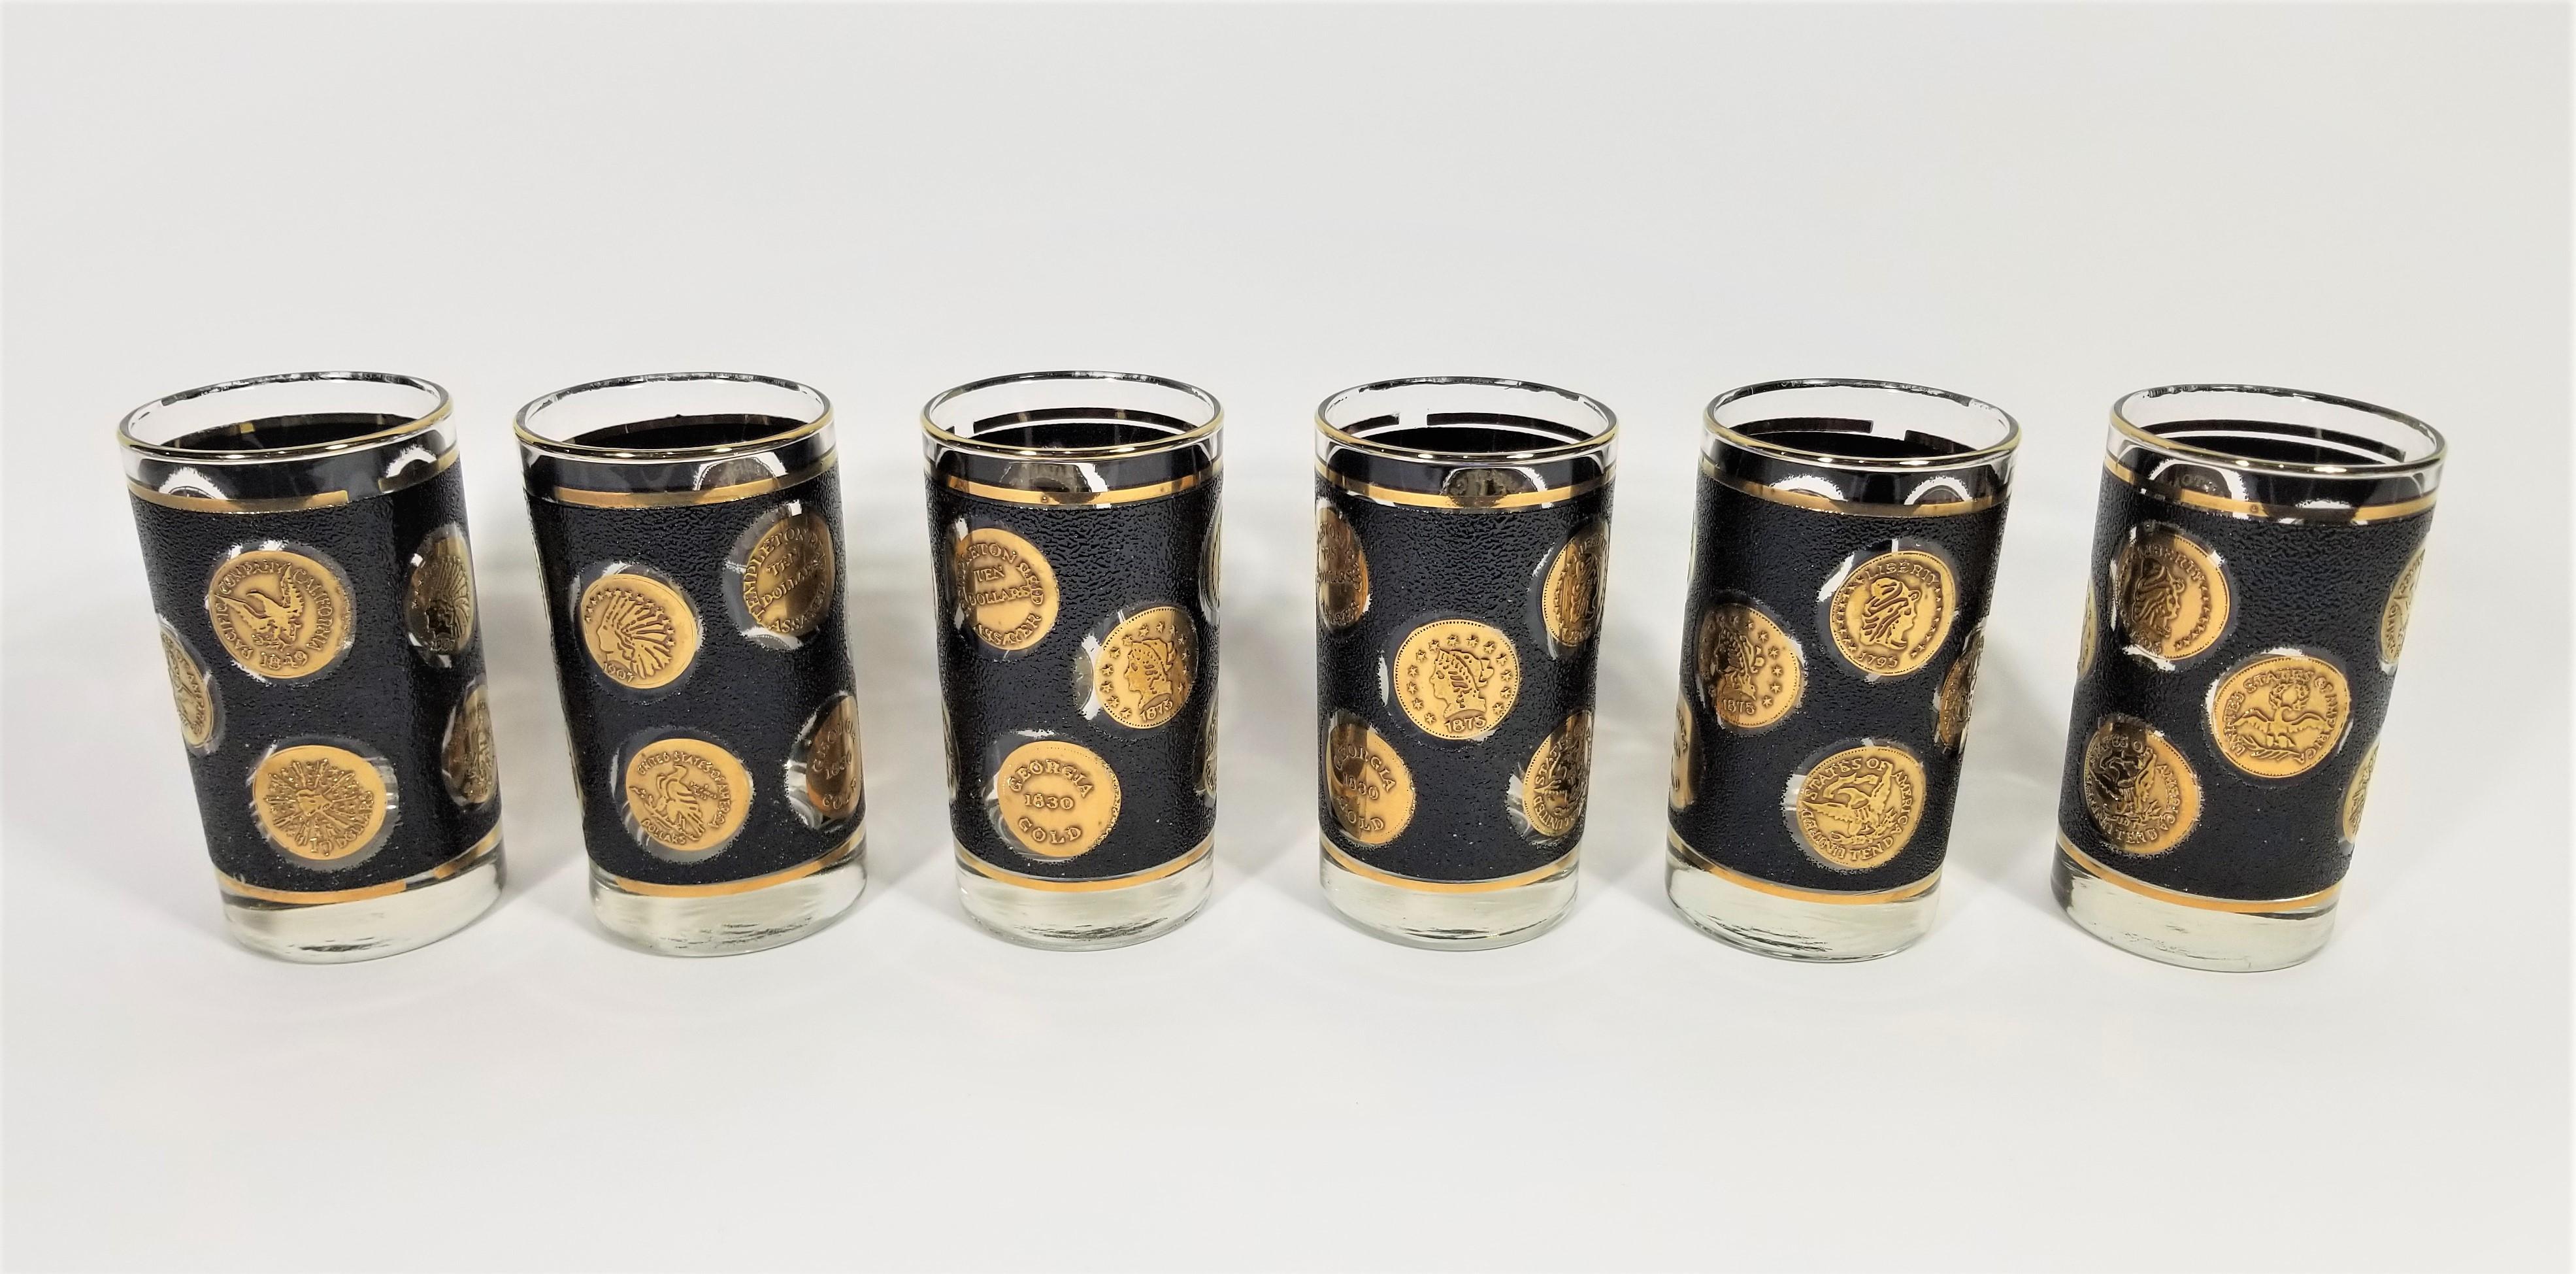 Libbey 22K Gold Glassware Barware Mid Century 1960s  In Good Condition For Sale In New York, NY